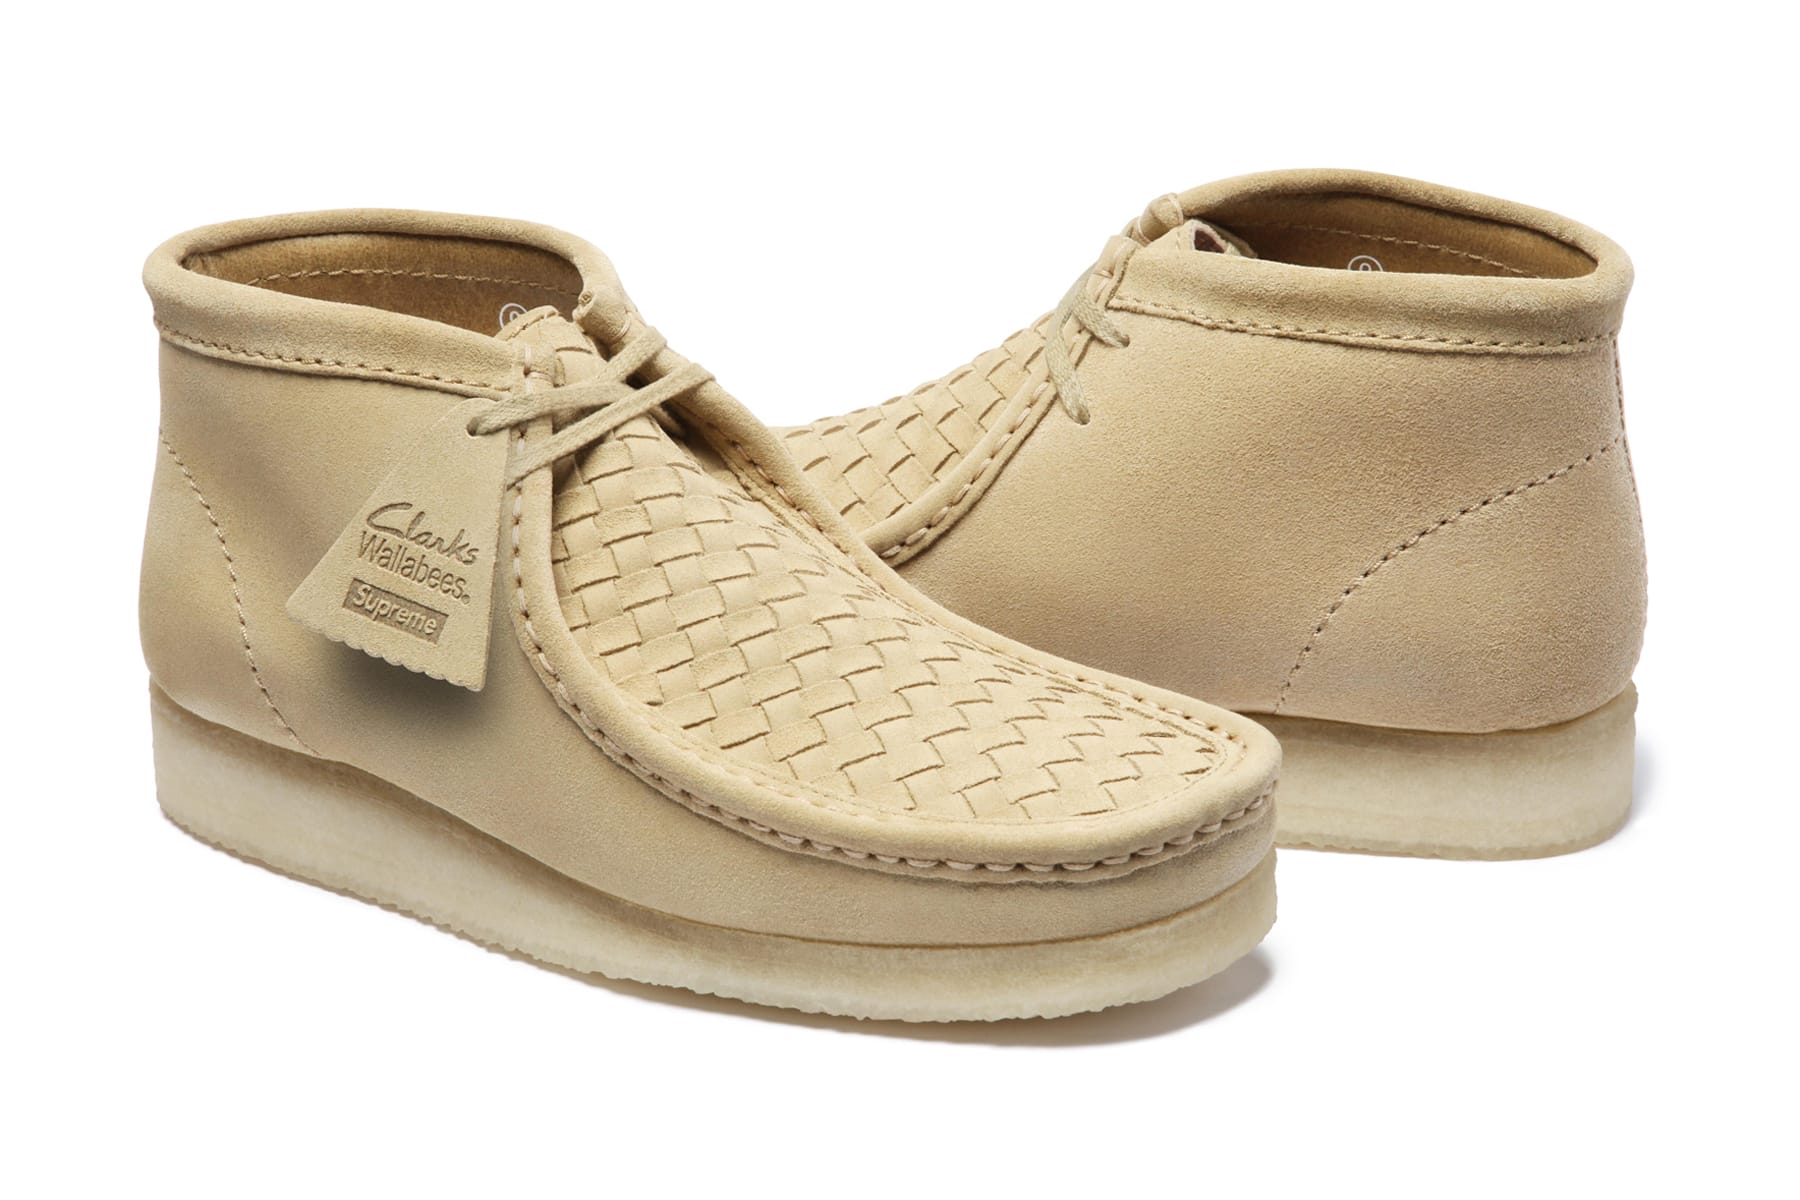 new clarks shoes 2016